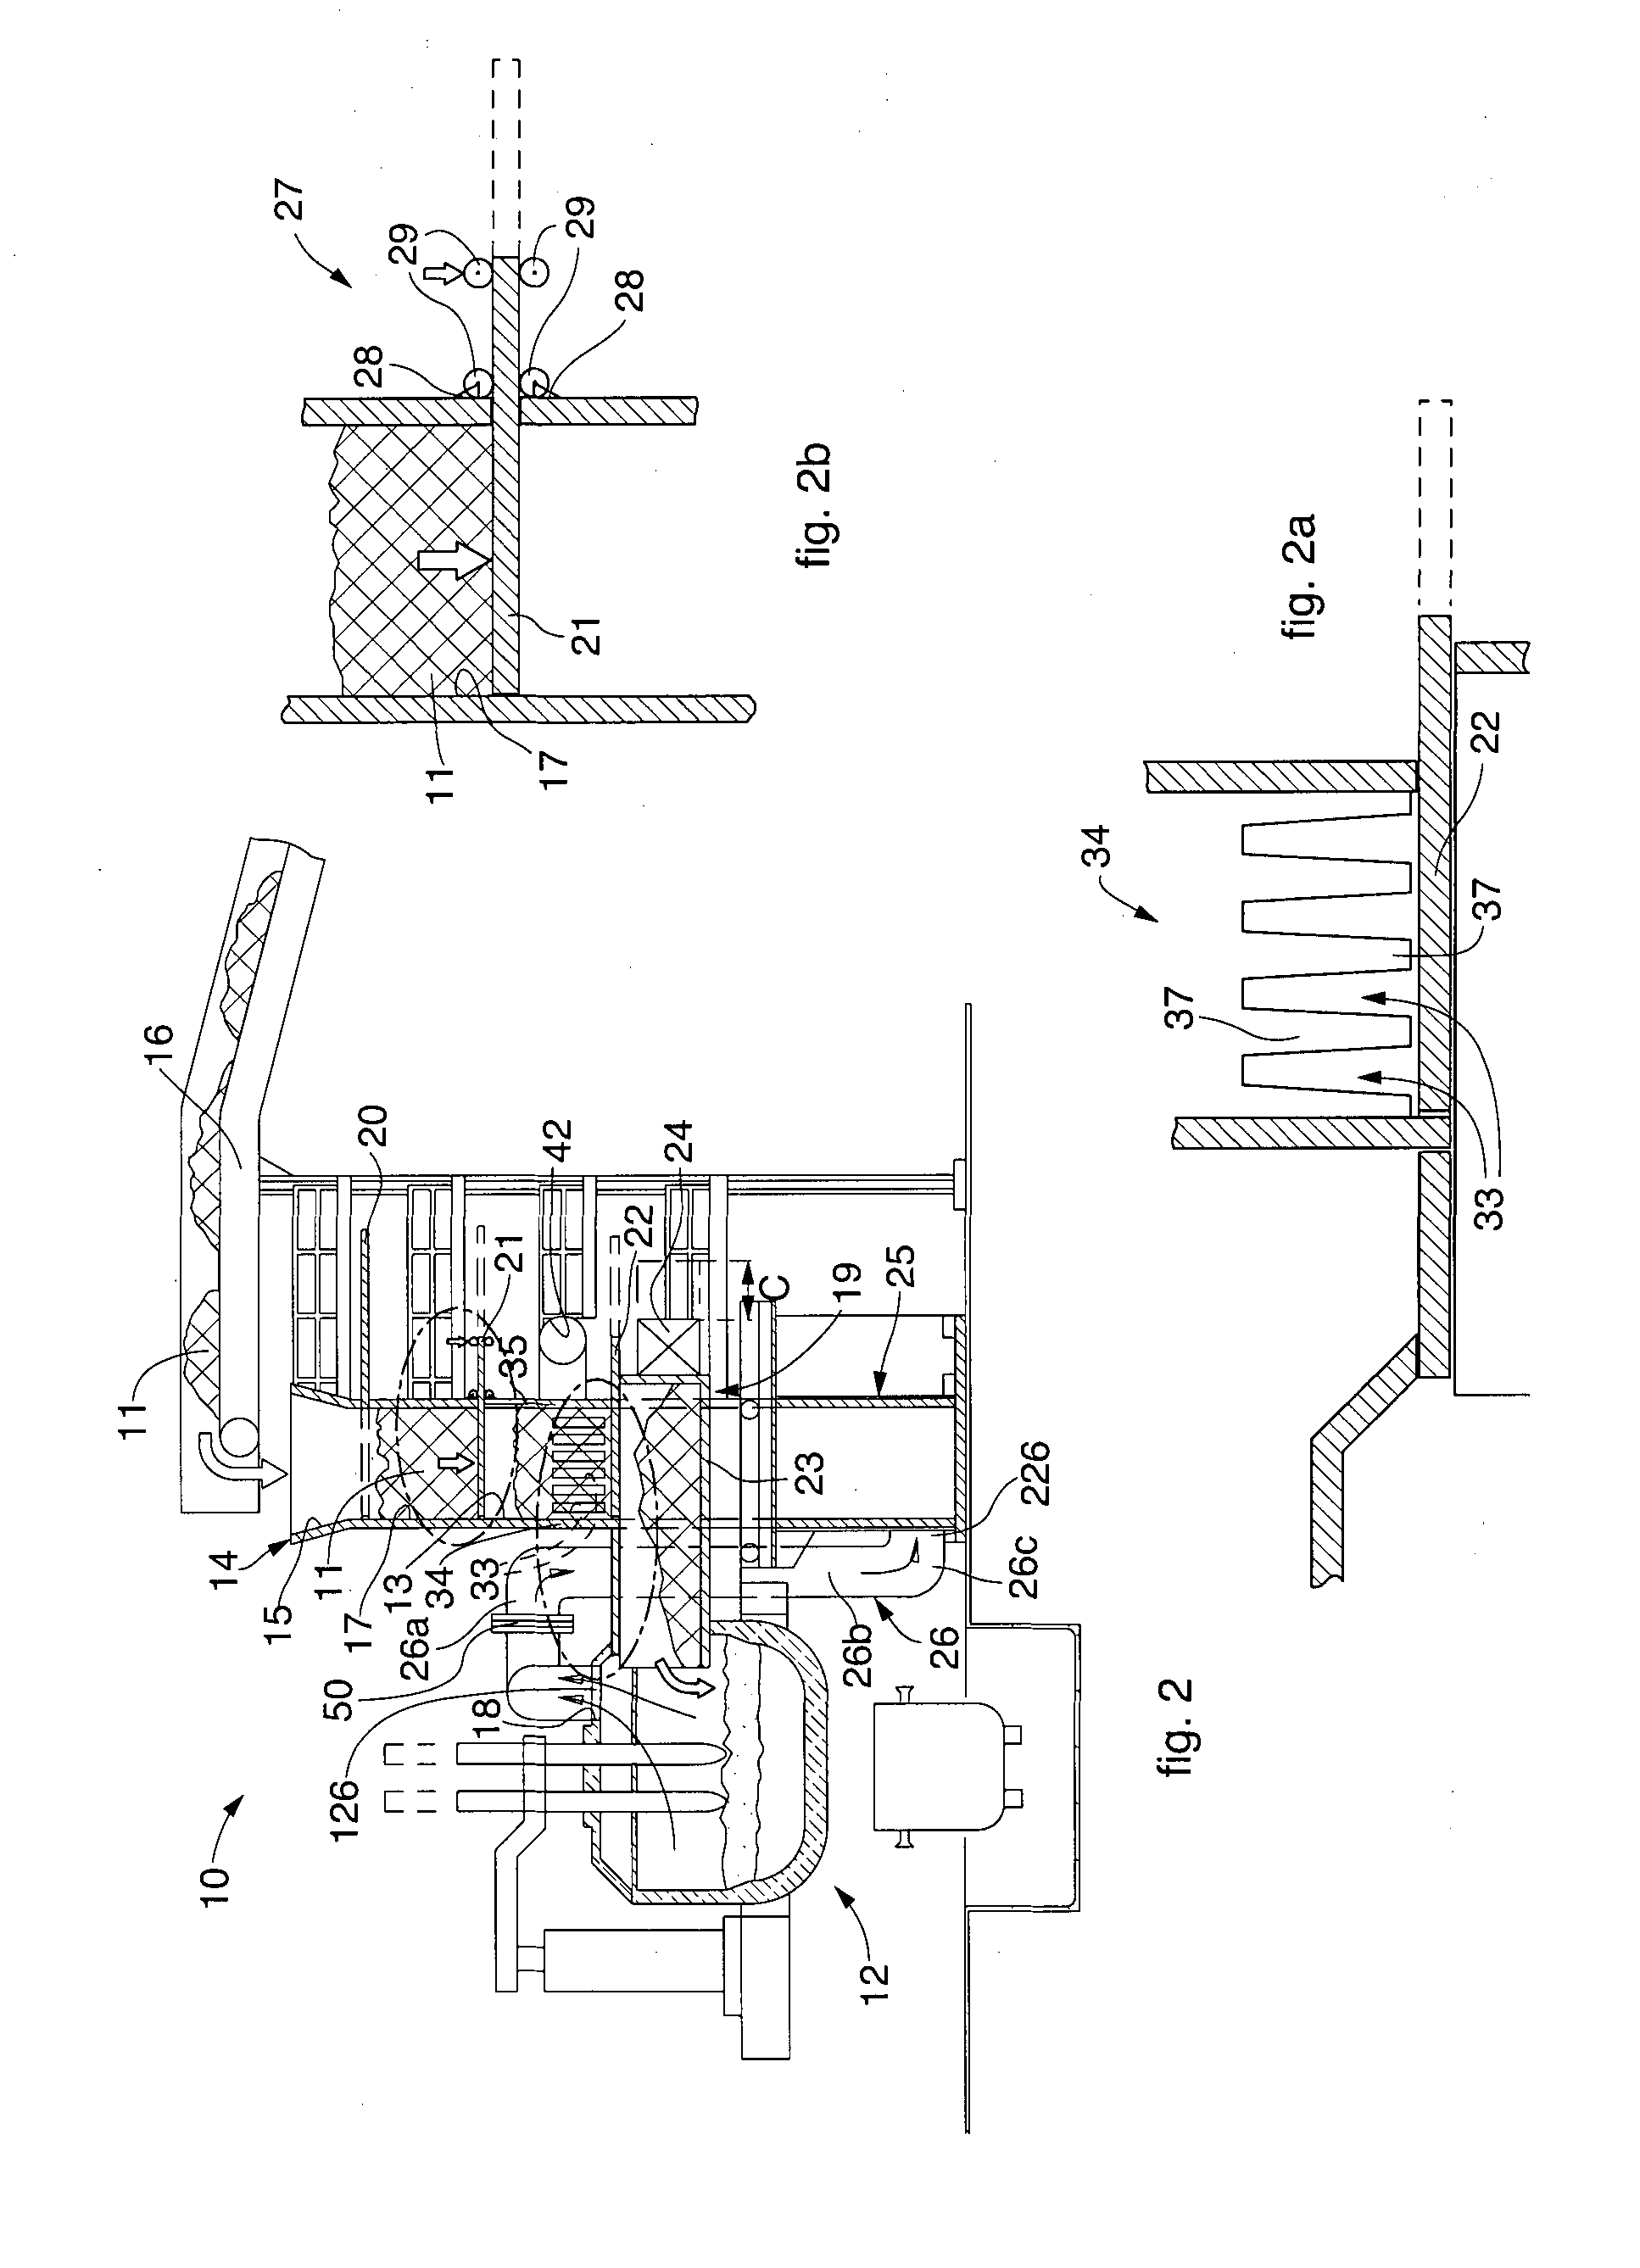 Apparatus and method to feed and preheat a metal charge to a melting furnace